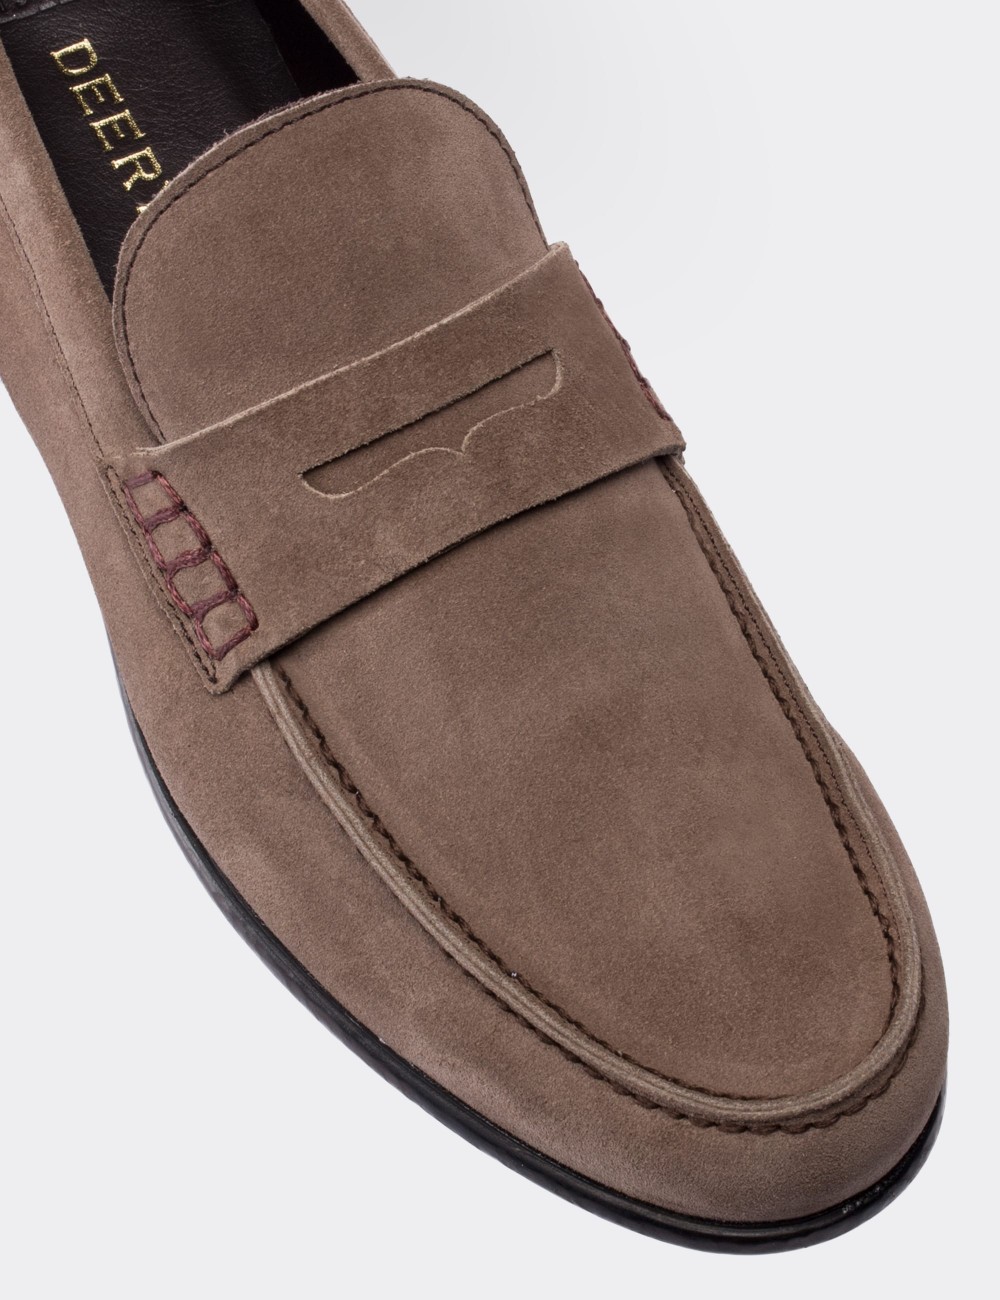 Sandstone Suede Leather Loafers - 01538MVZNC01